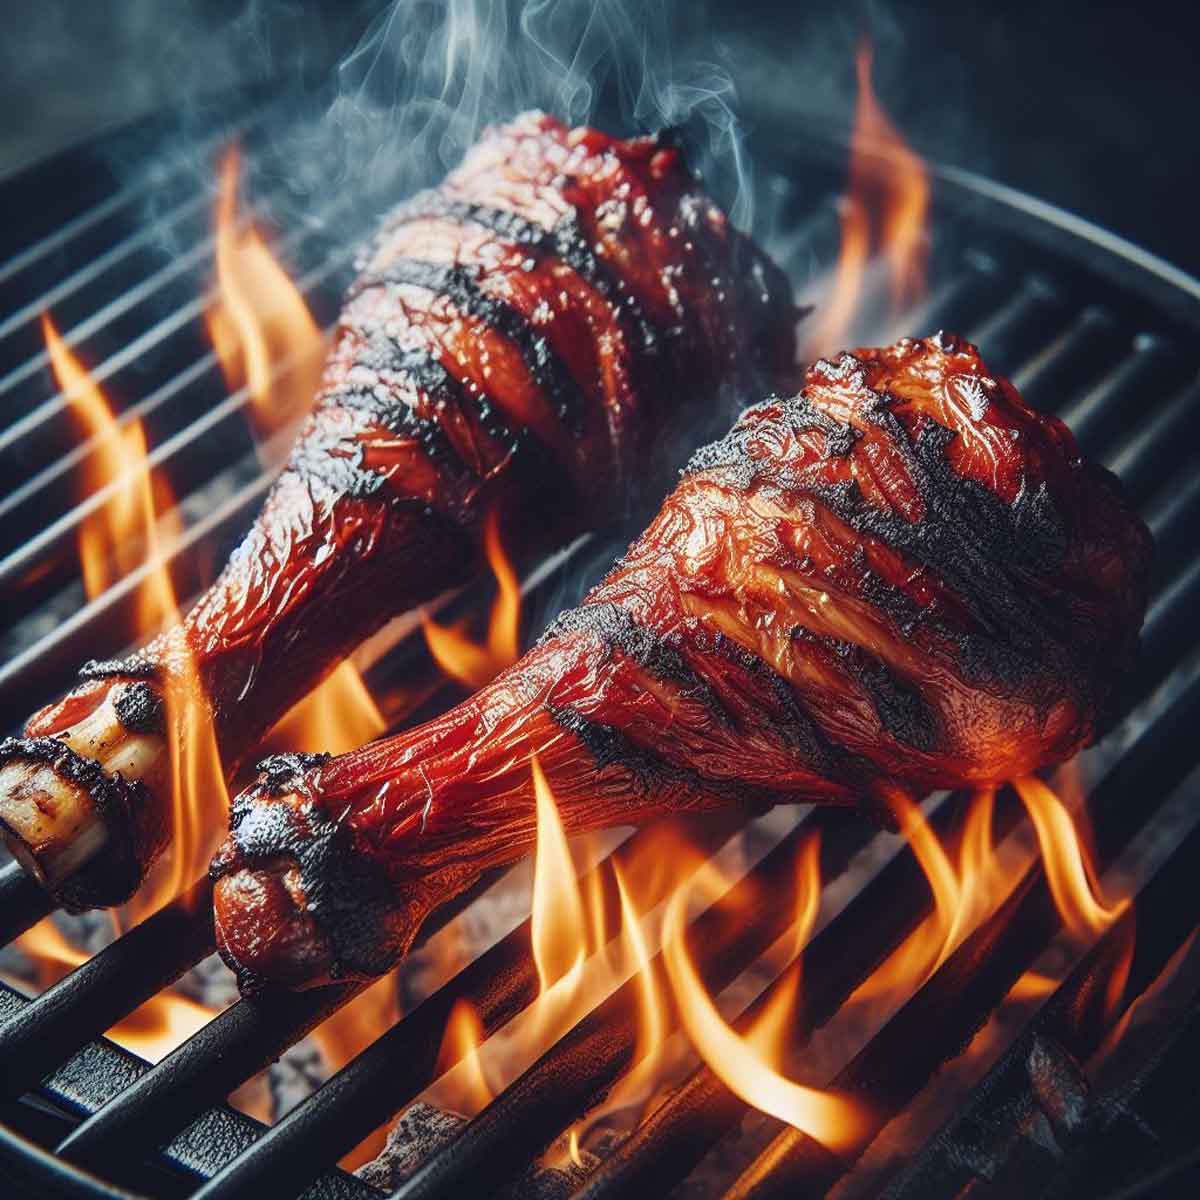 Smoked turkey legs being reheated directly over medium flames on a grill, showing crispy, golden-brown skin.